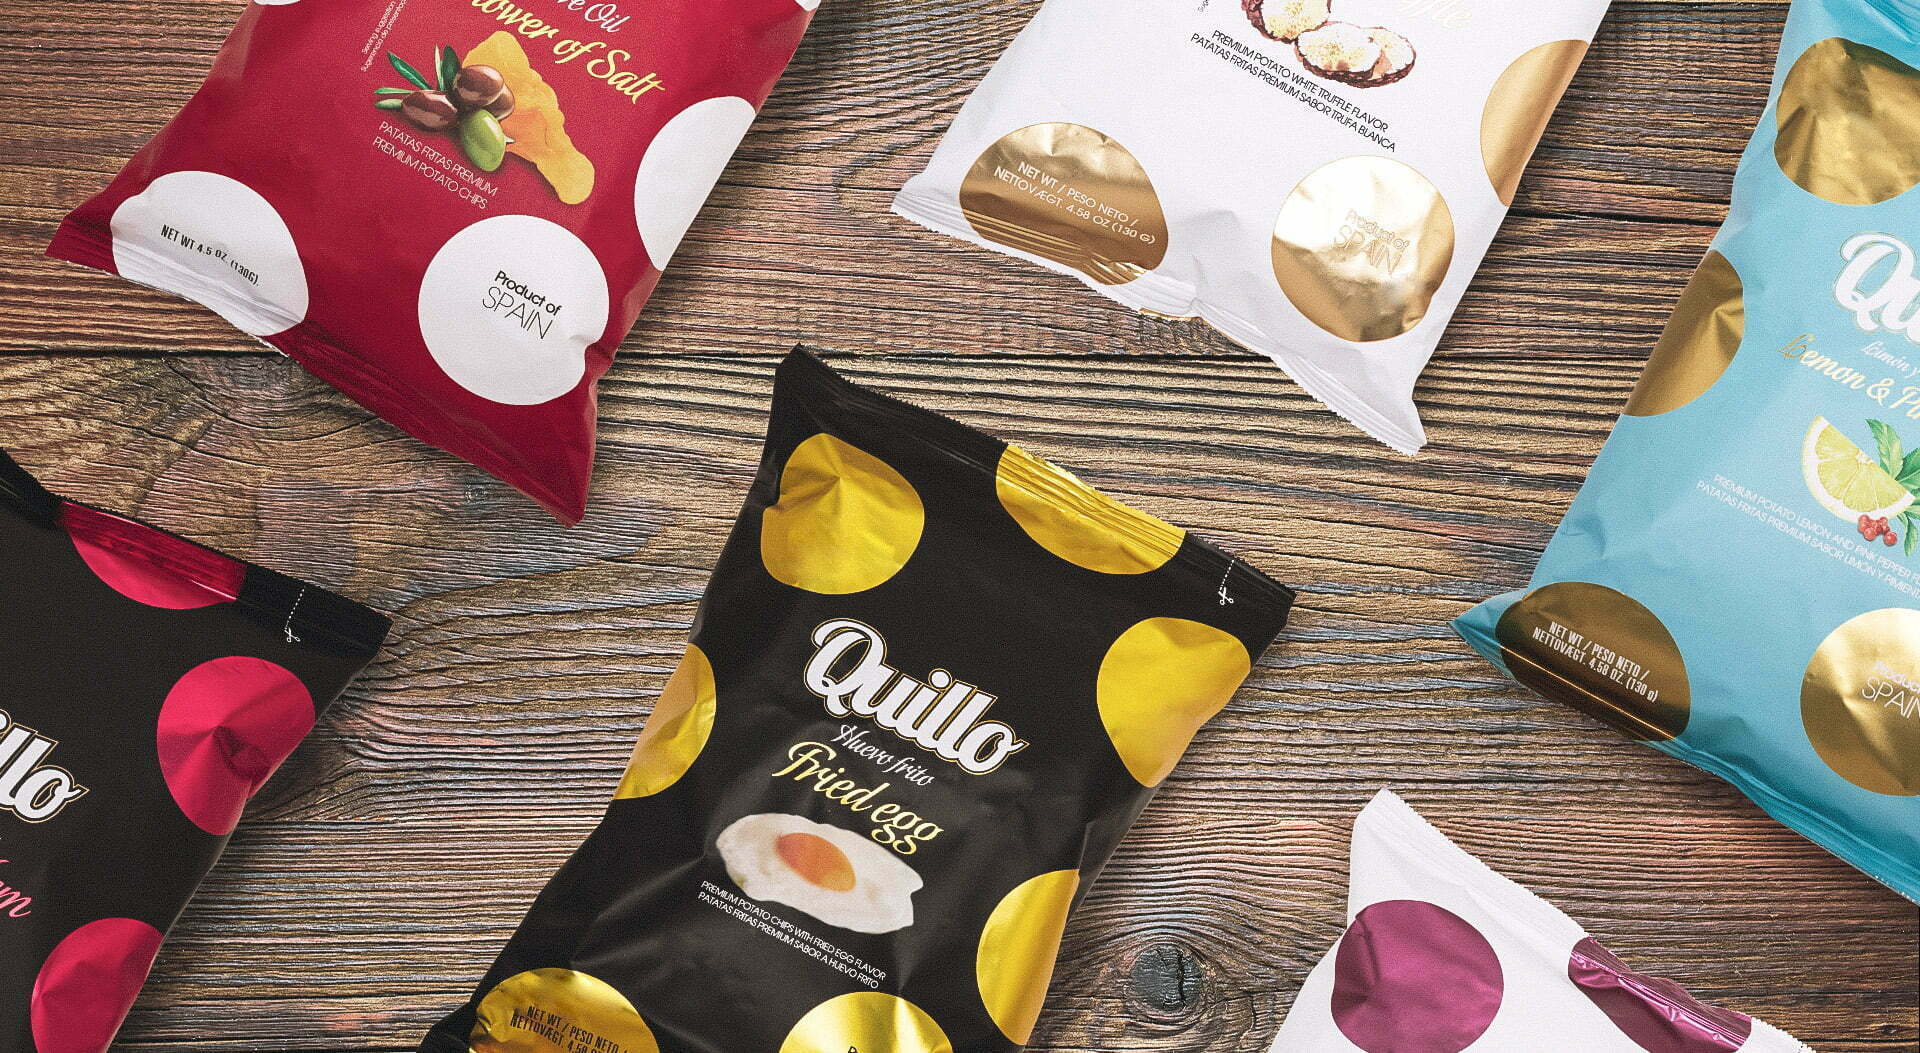 Quillo Chips